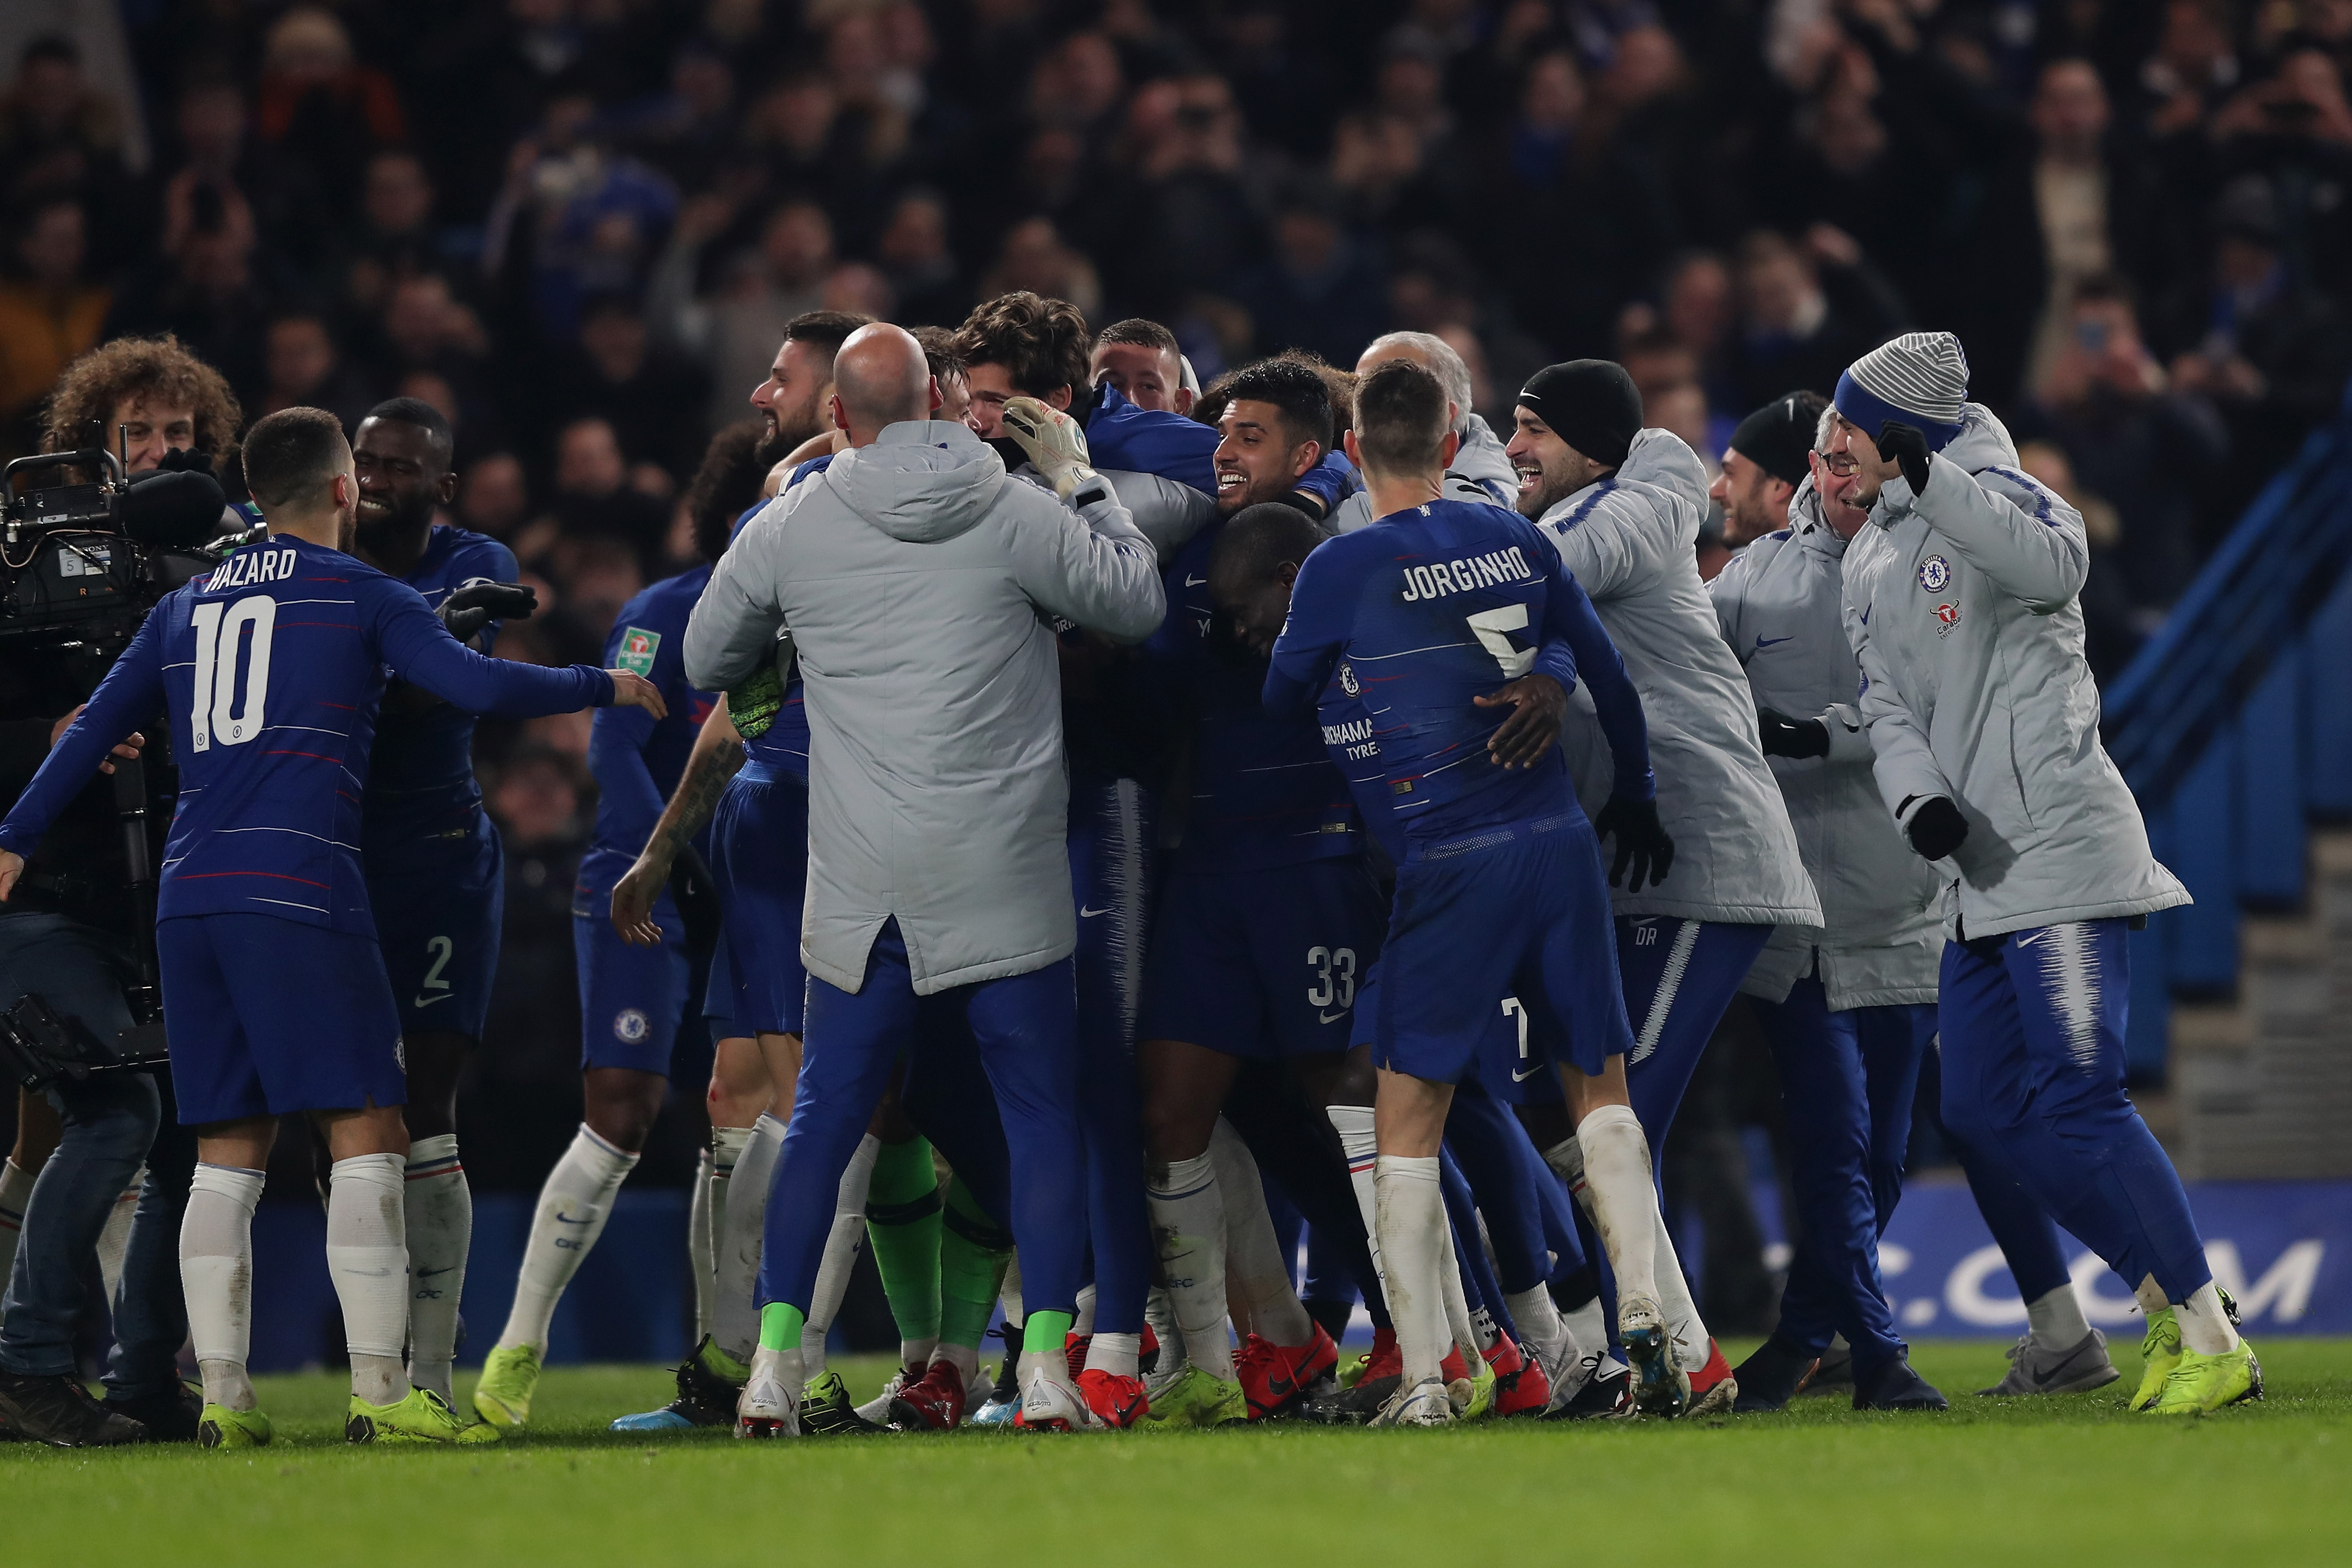 LONDON, ENGLAND - JANUARY 24:  The Chelsea side celebrate after winning on penalties during the Carabao Cup Semi-Final Second Leg match between Chelsea and Tottenham Hotspur at Stamford Bridge on January 24, 2019 in London, England.  (Photo by Christopher Lee/Getty Images)